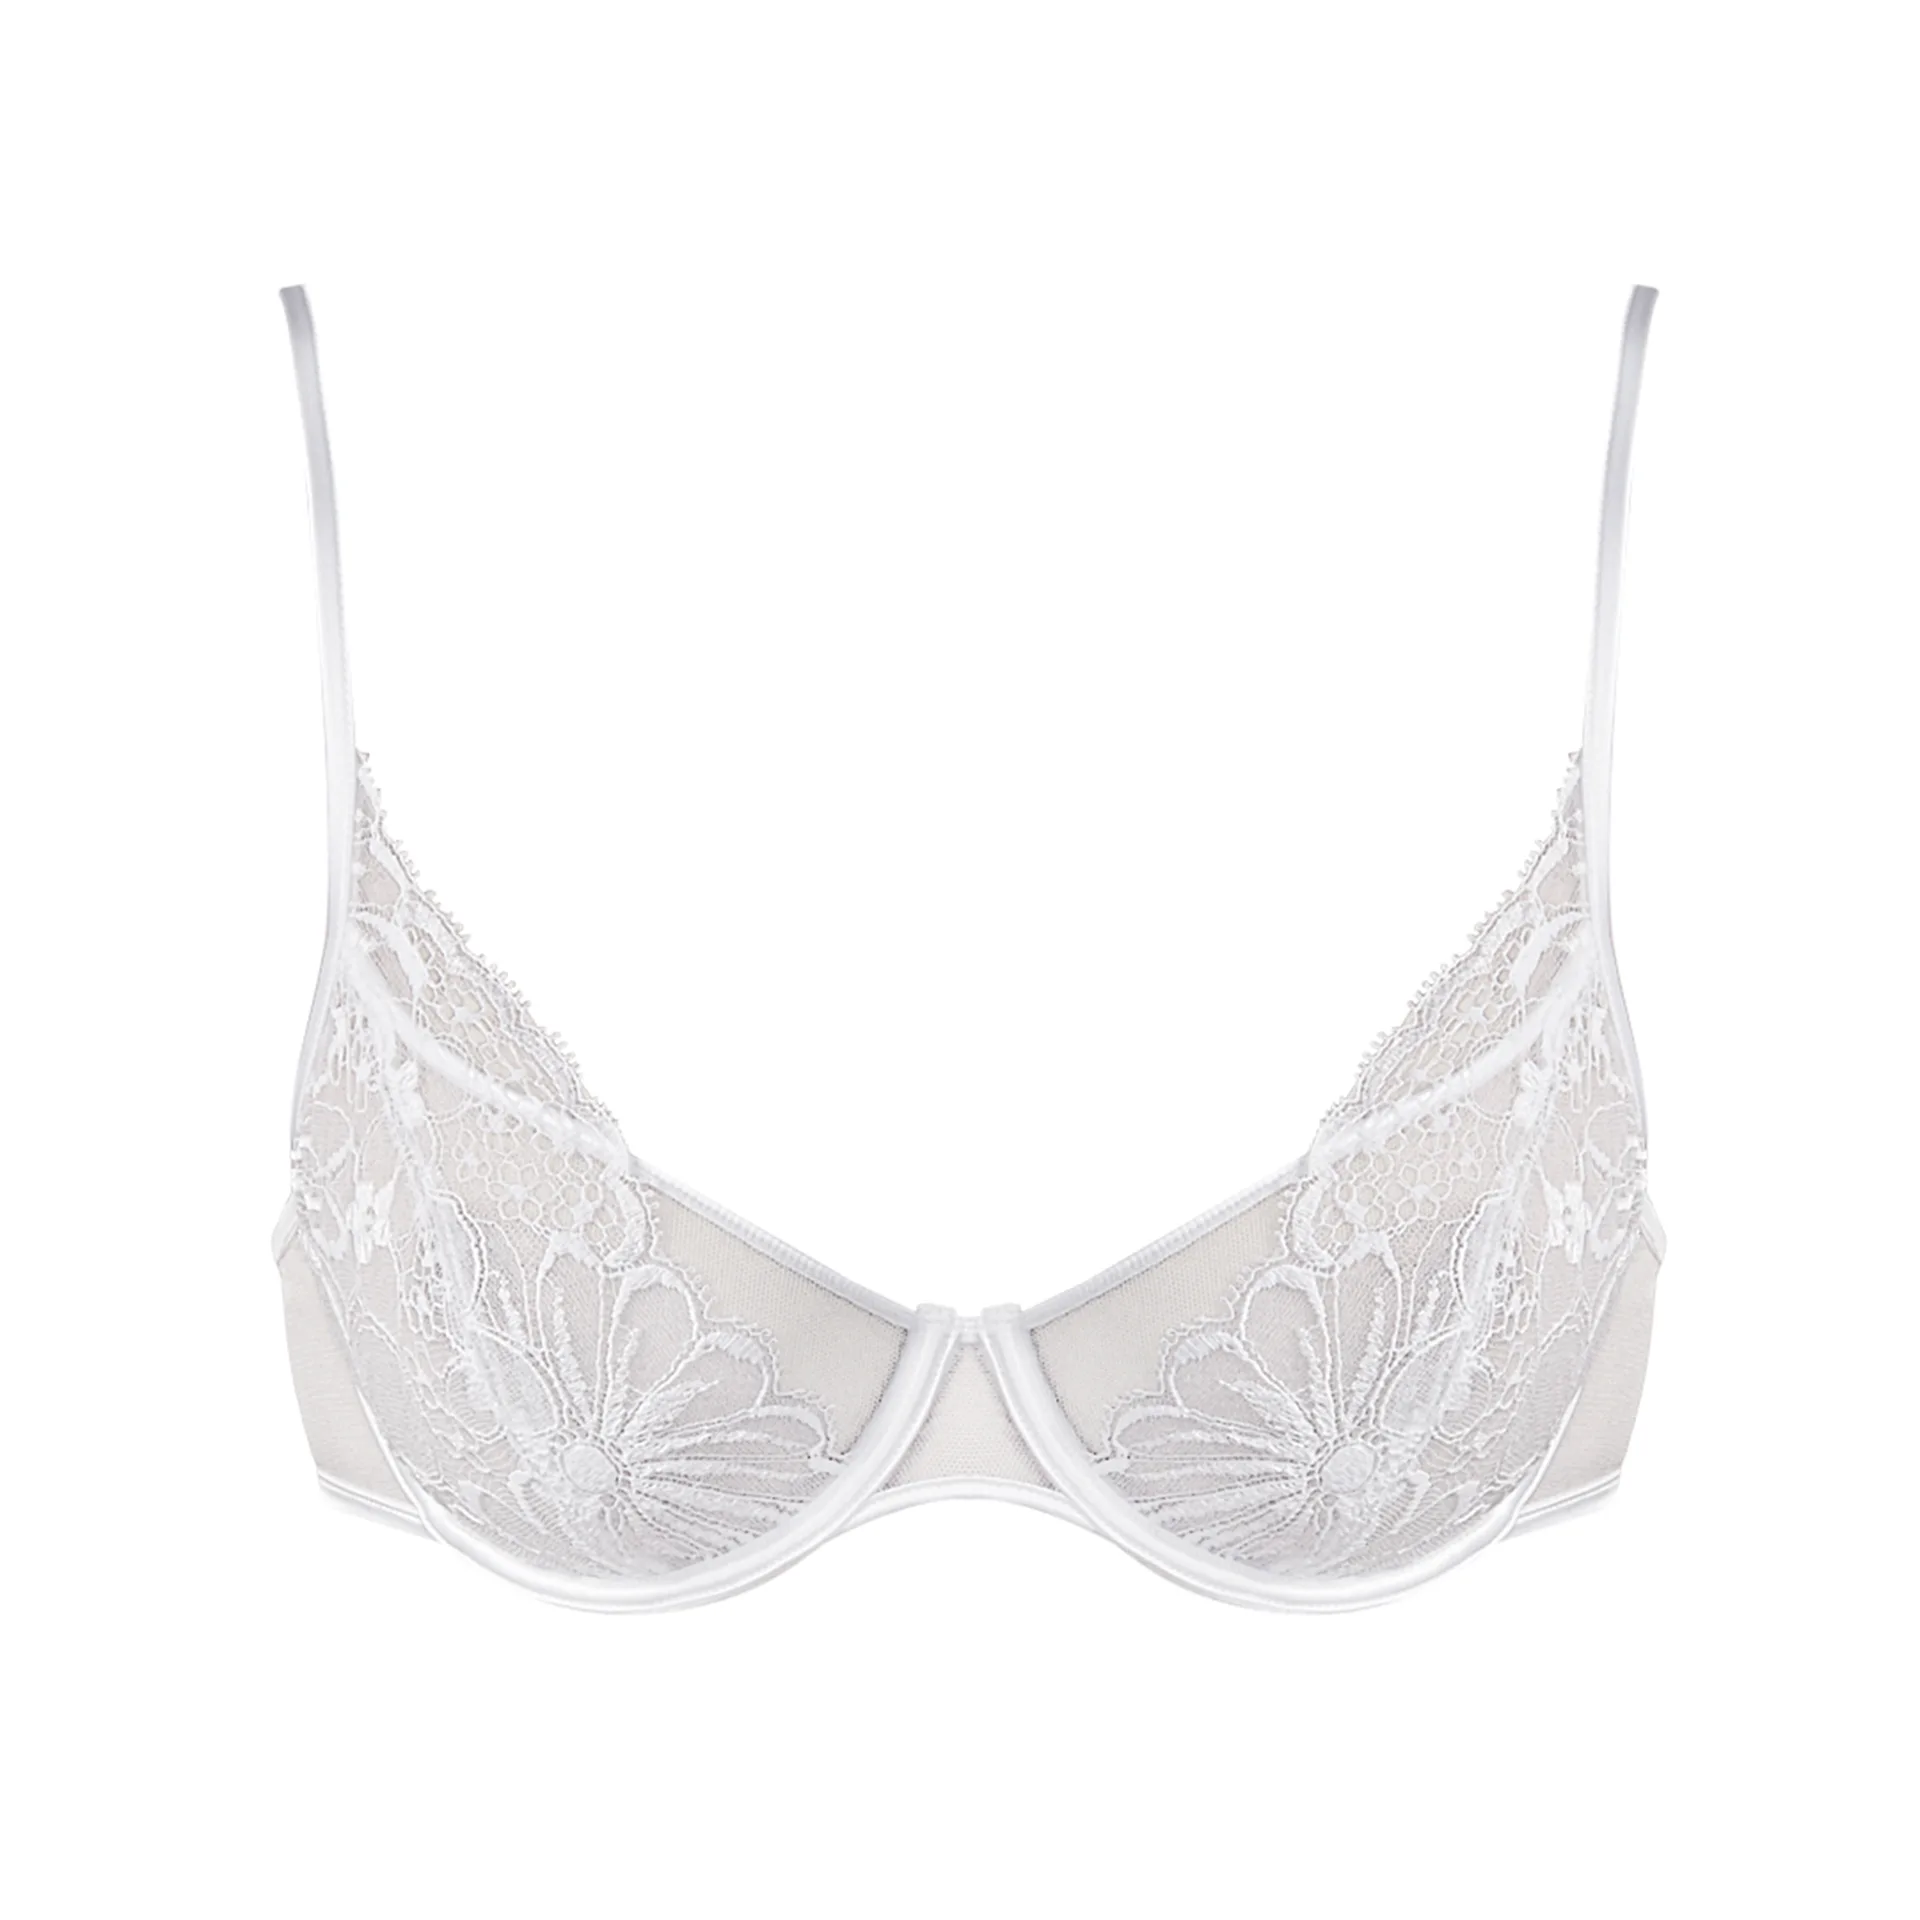 Off-white padded push-up bra with Leavers lace trim